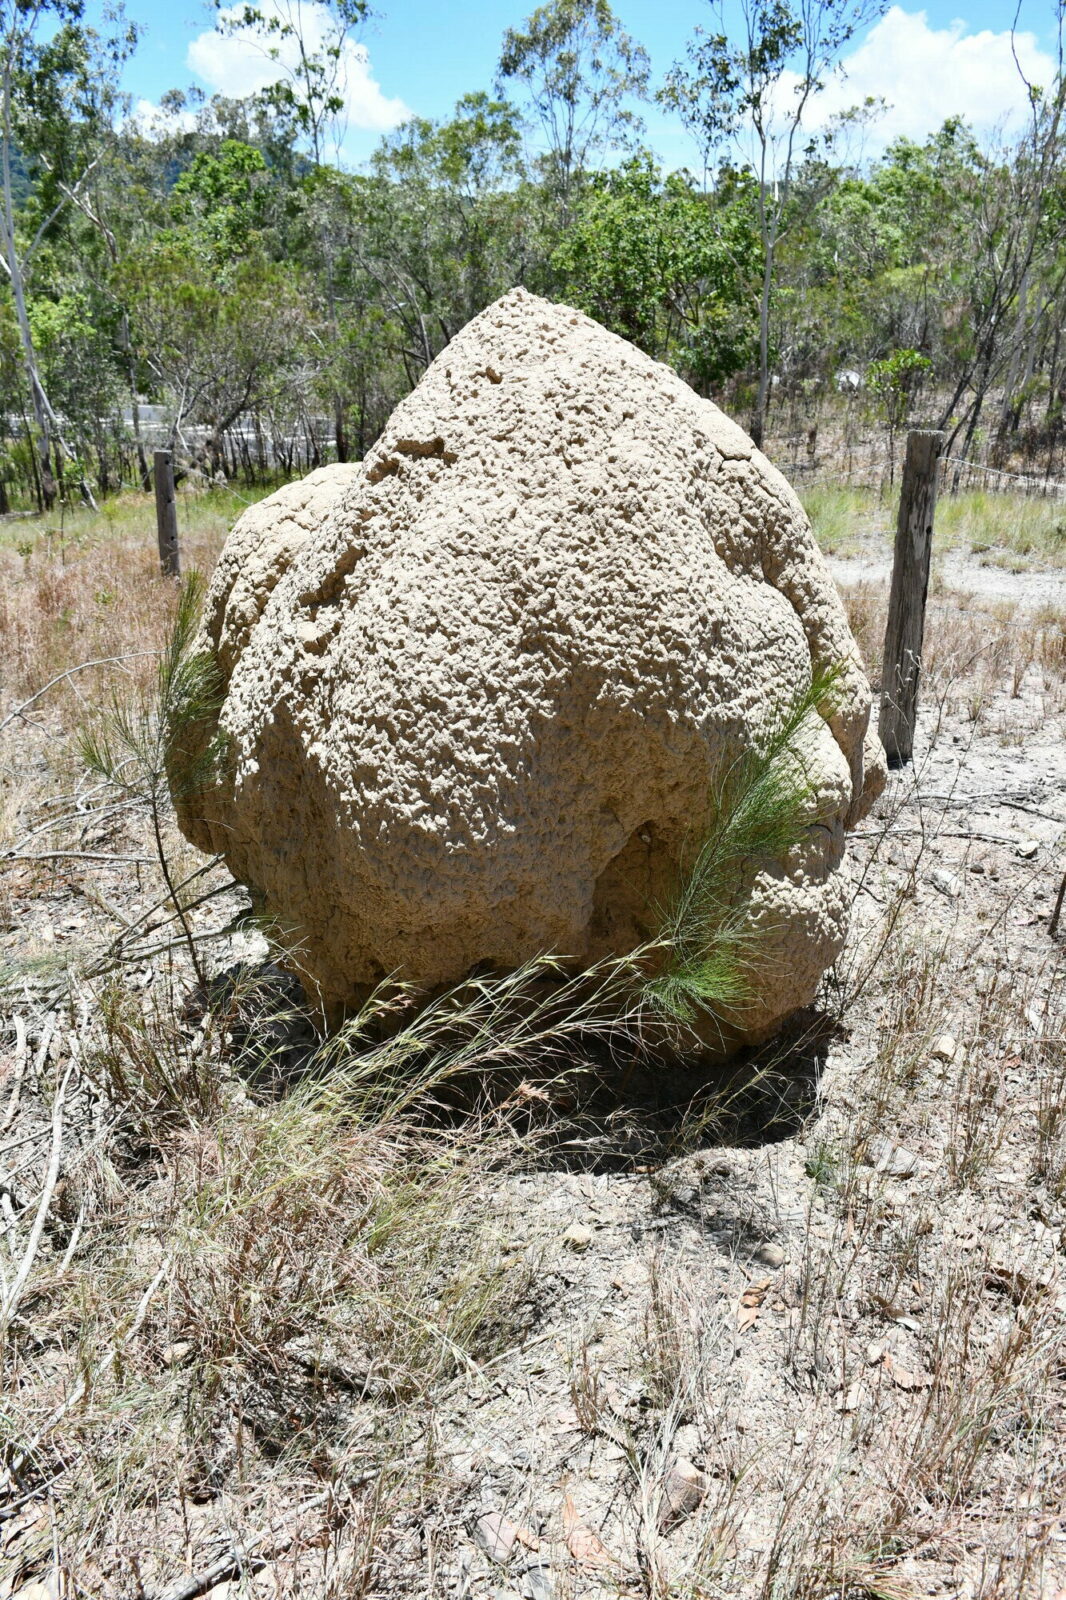 A termite mound, most likely built by the species Nasutitermes magnus, Queensland, Australia. Photo Andrea Perna [CC BY-SA 3.0]